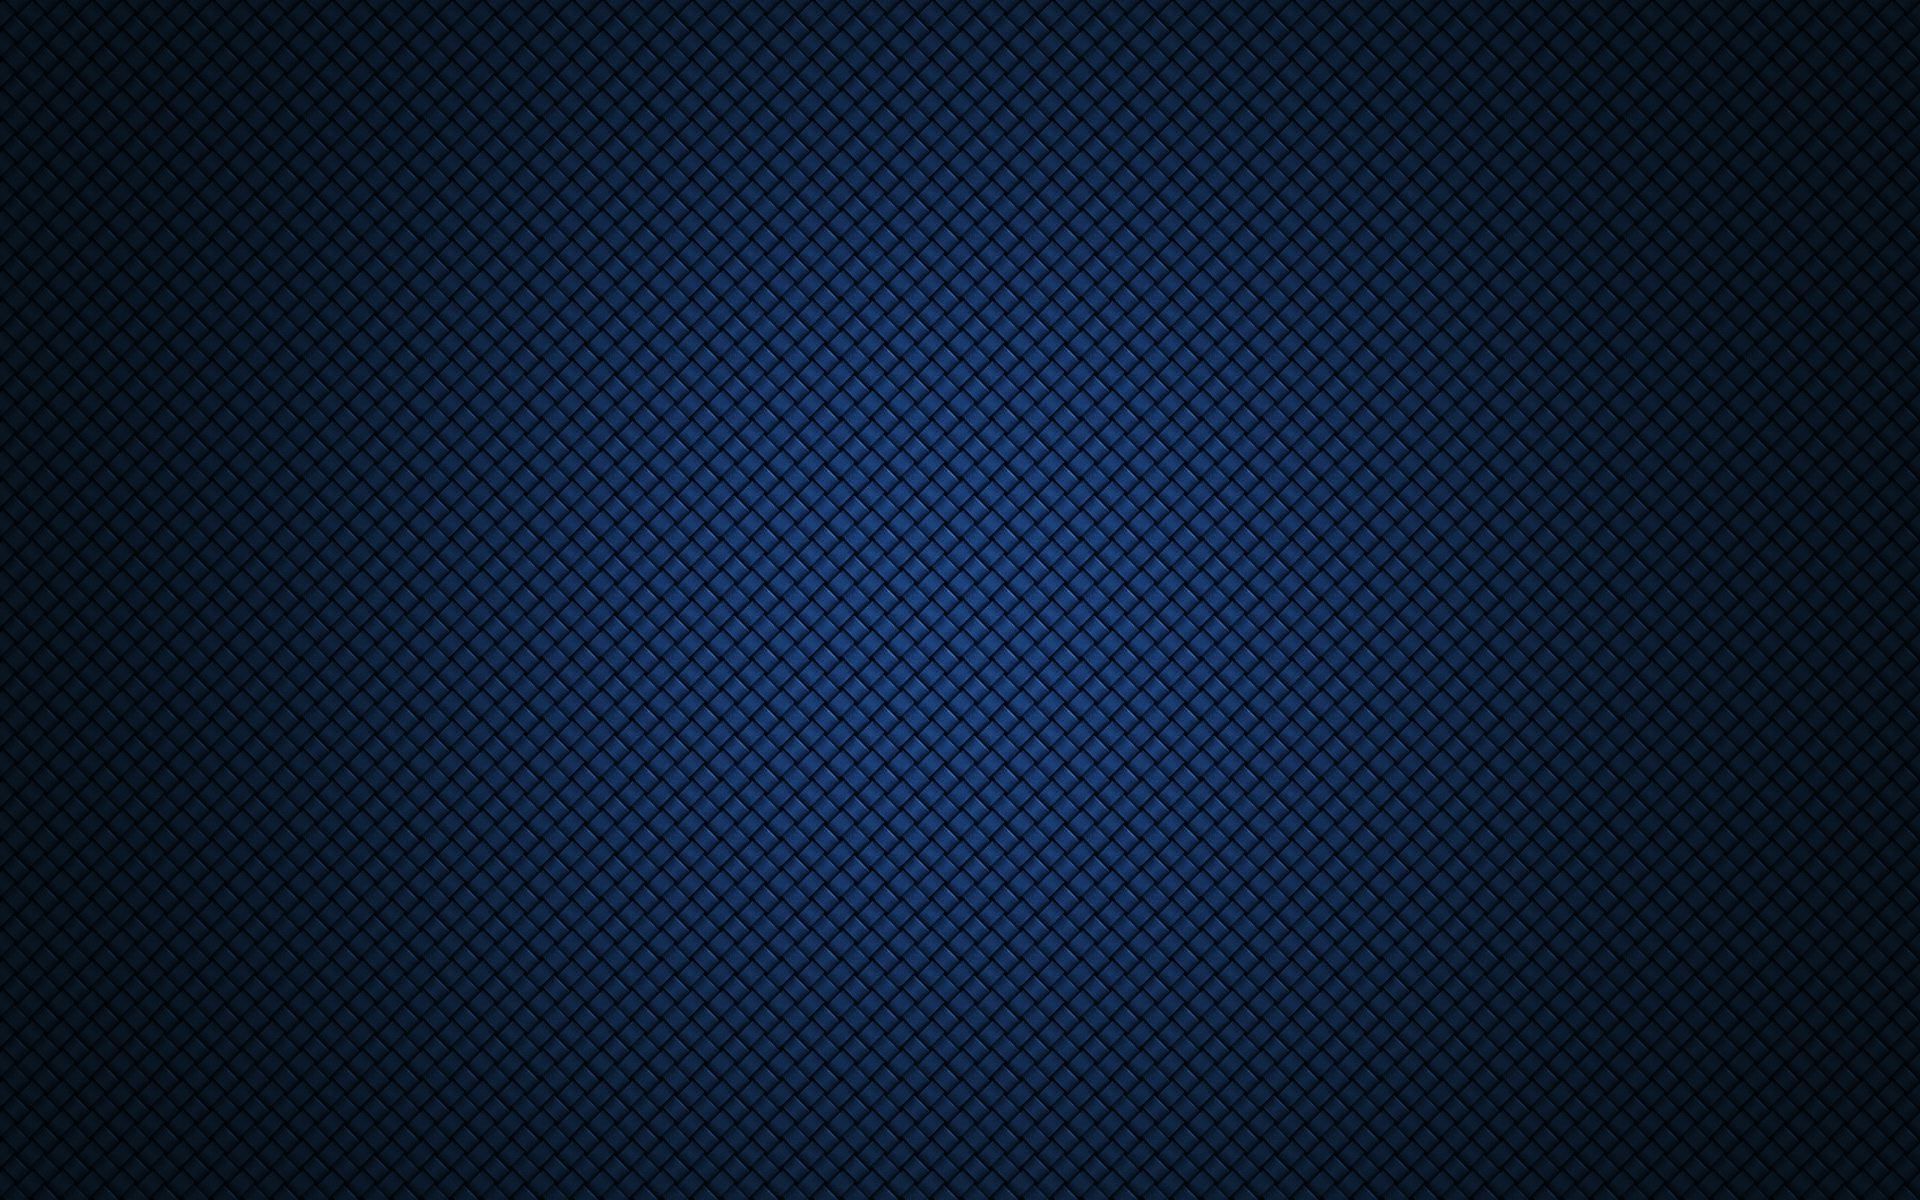 Plain wallpaper with visual shinning effect theme in high quality